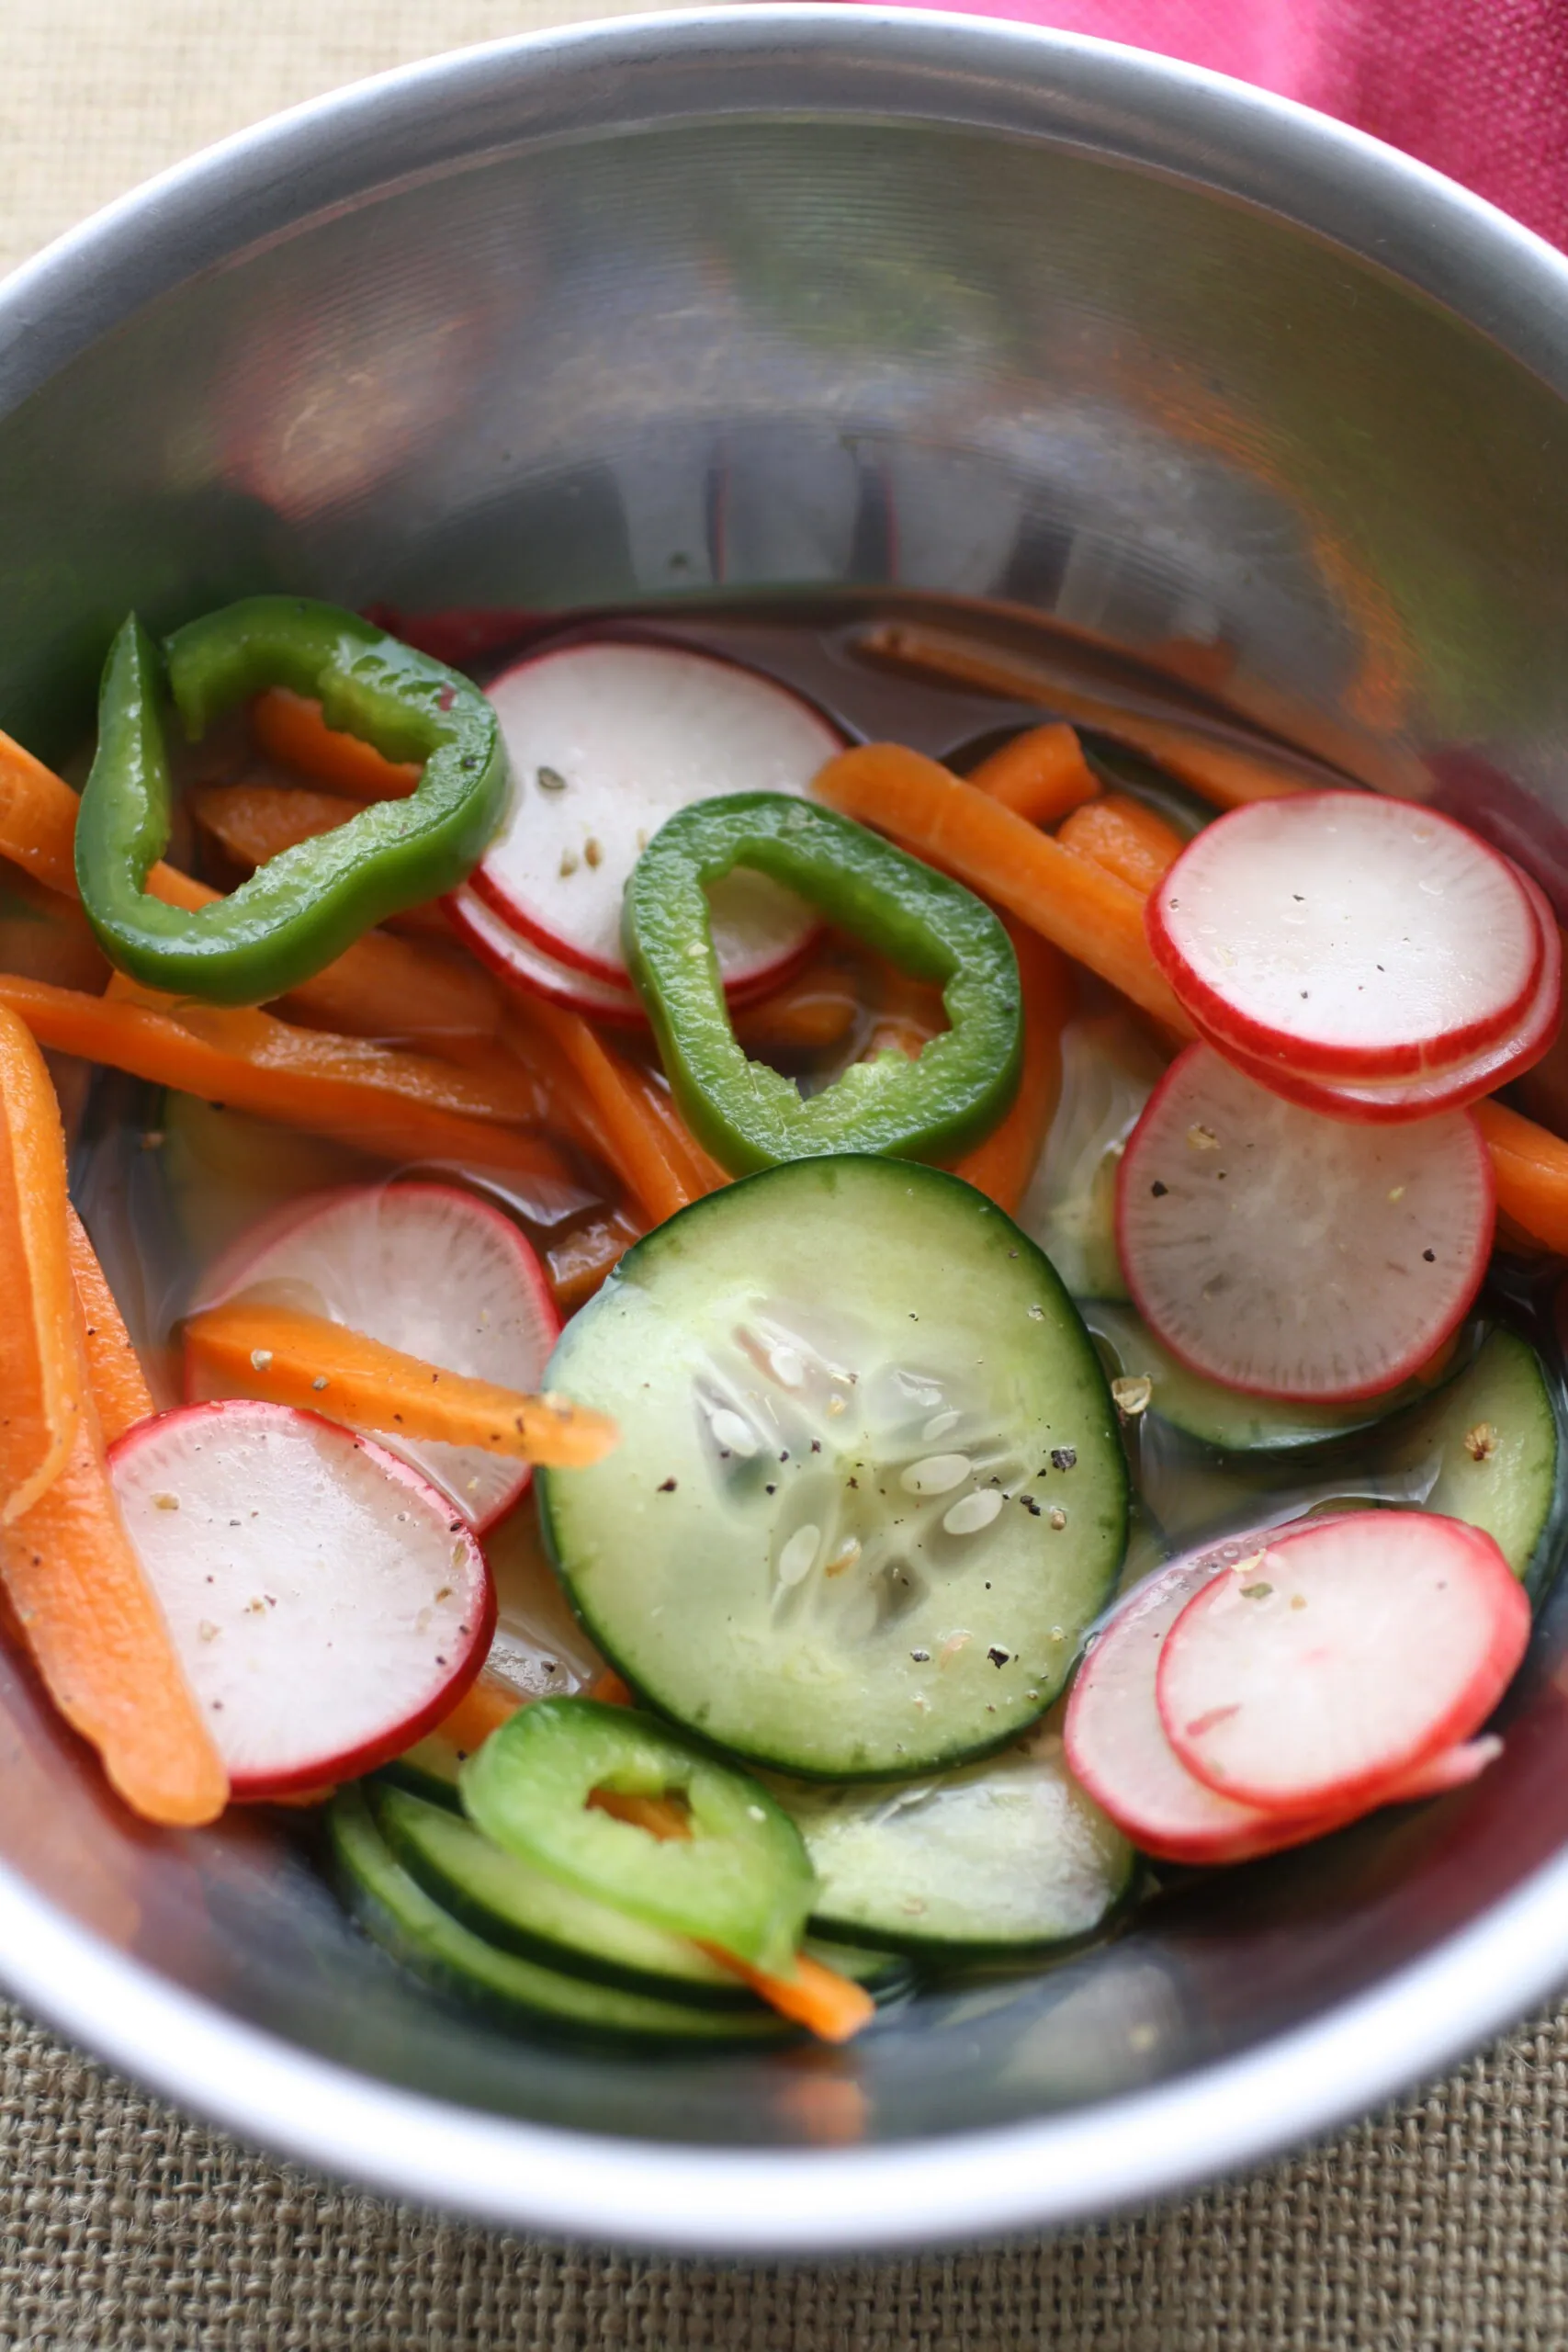 A variety of veggies marinating and ready for adding to Spicy Tofu Banh Mi Sandwiches. 